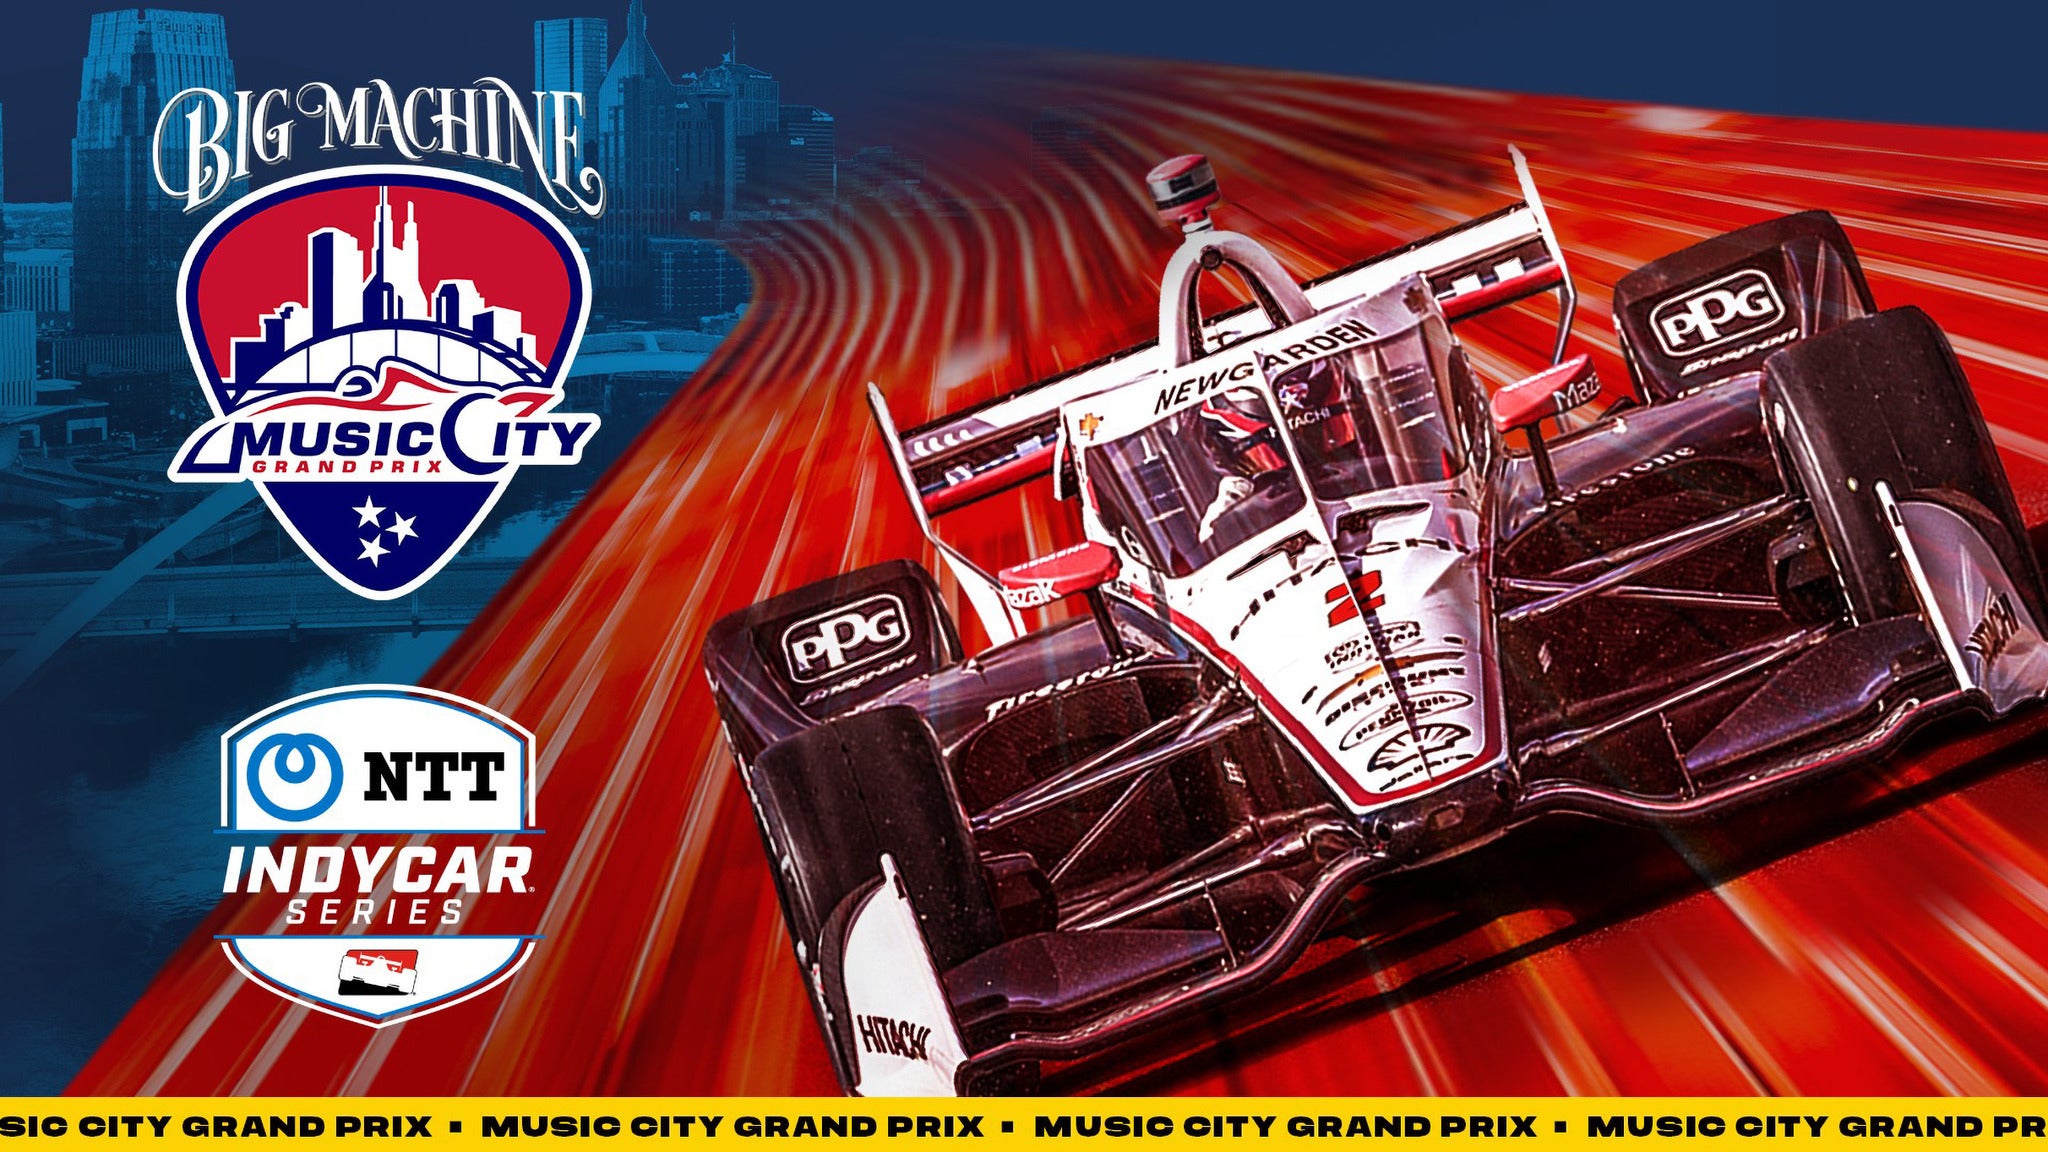 Image used with permission from Ticketmaster | Big Machine Music City Grand Prix tickets